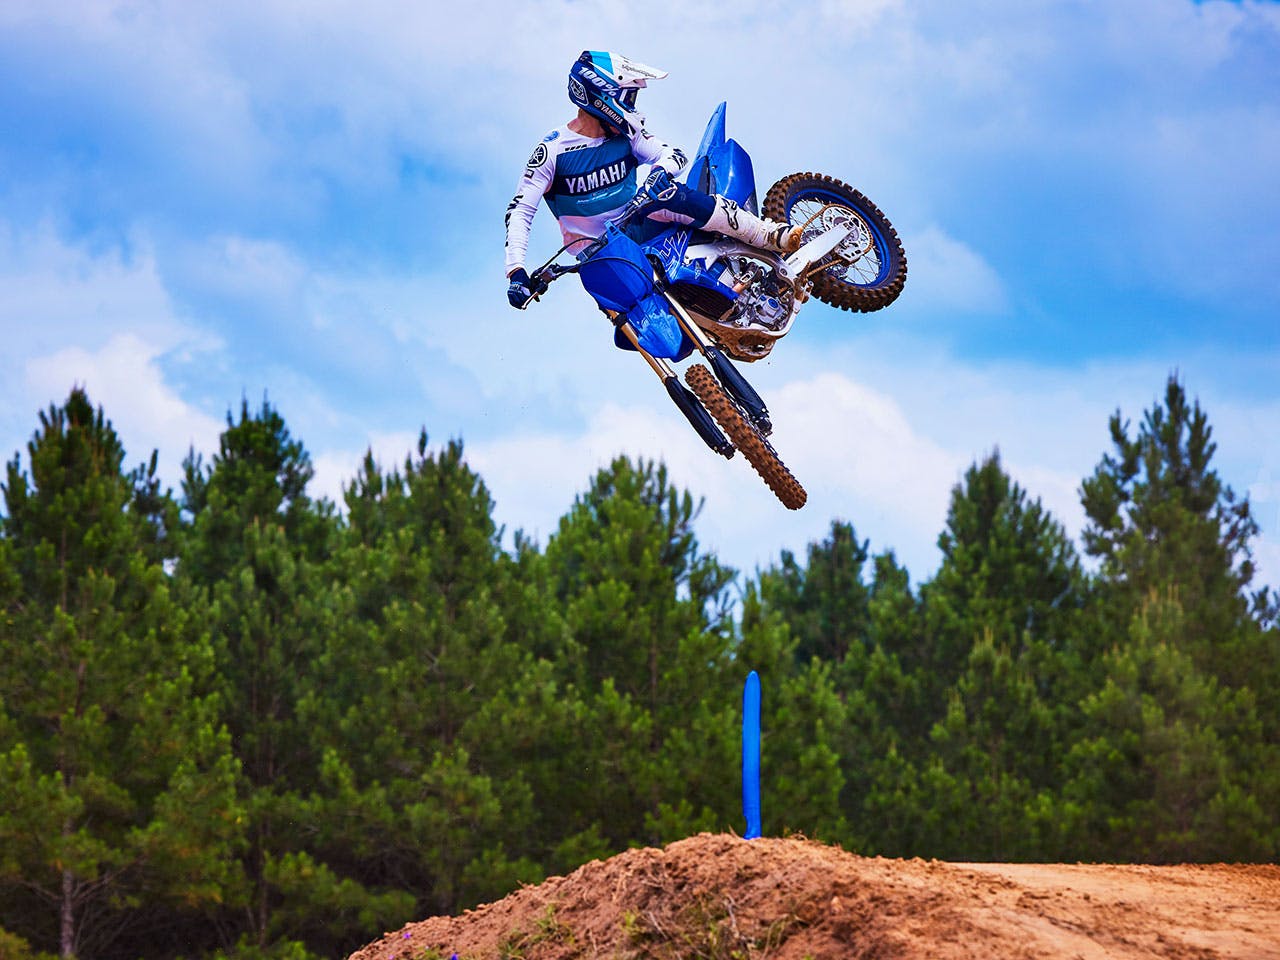 Yamaha YZ450F in team yamaha blue colour, being ridden off-track